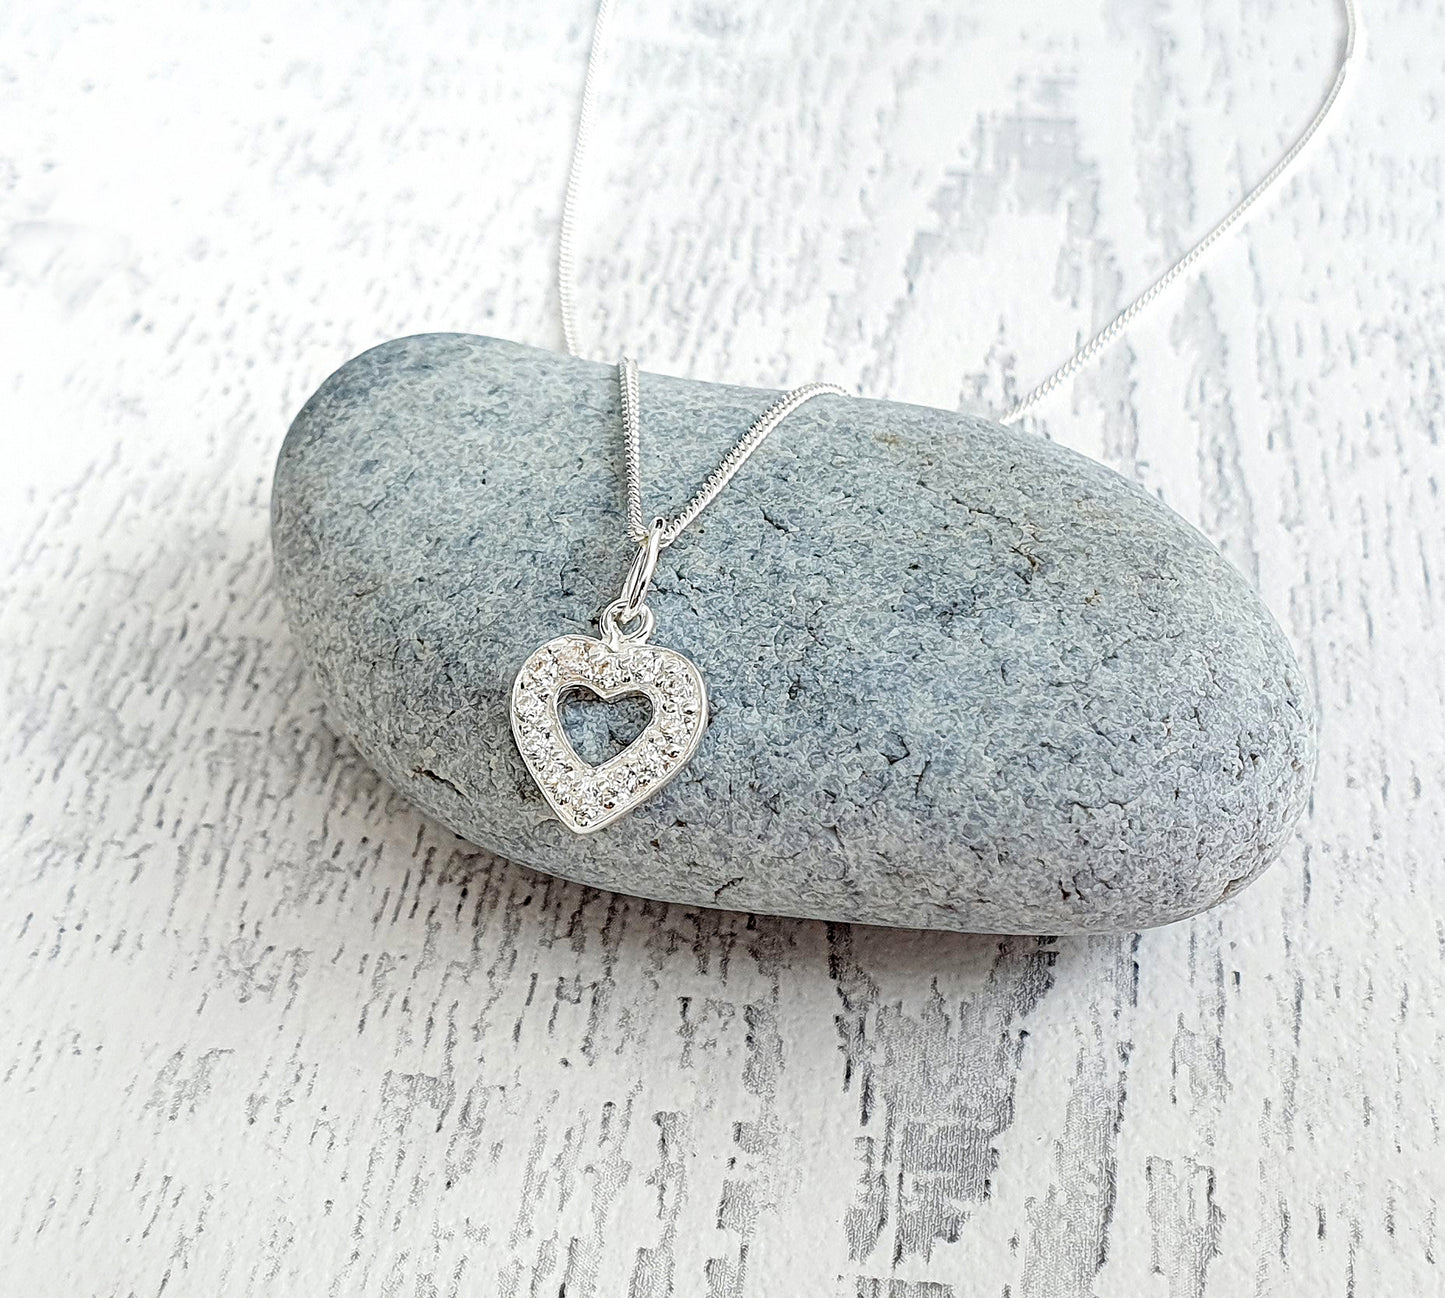 13th Birthday Heart Necklace with Cubic Zirconia in Sterling Silver 925, Personalised Gift